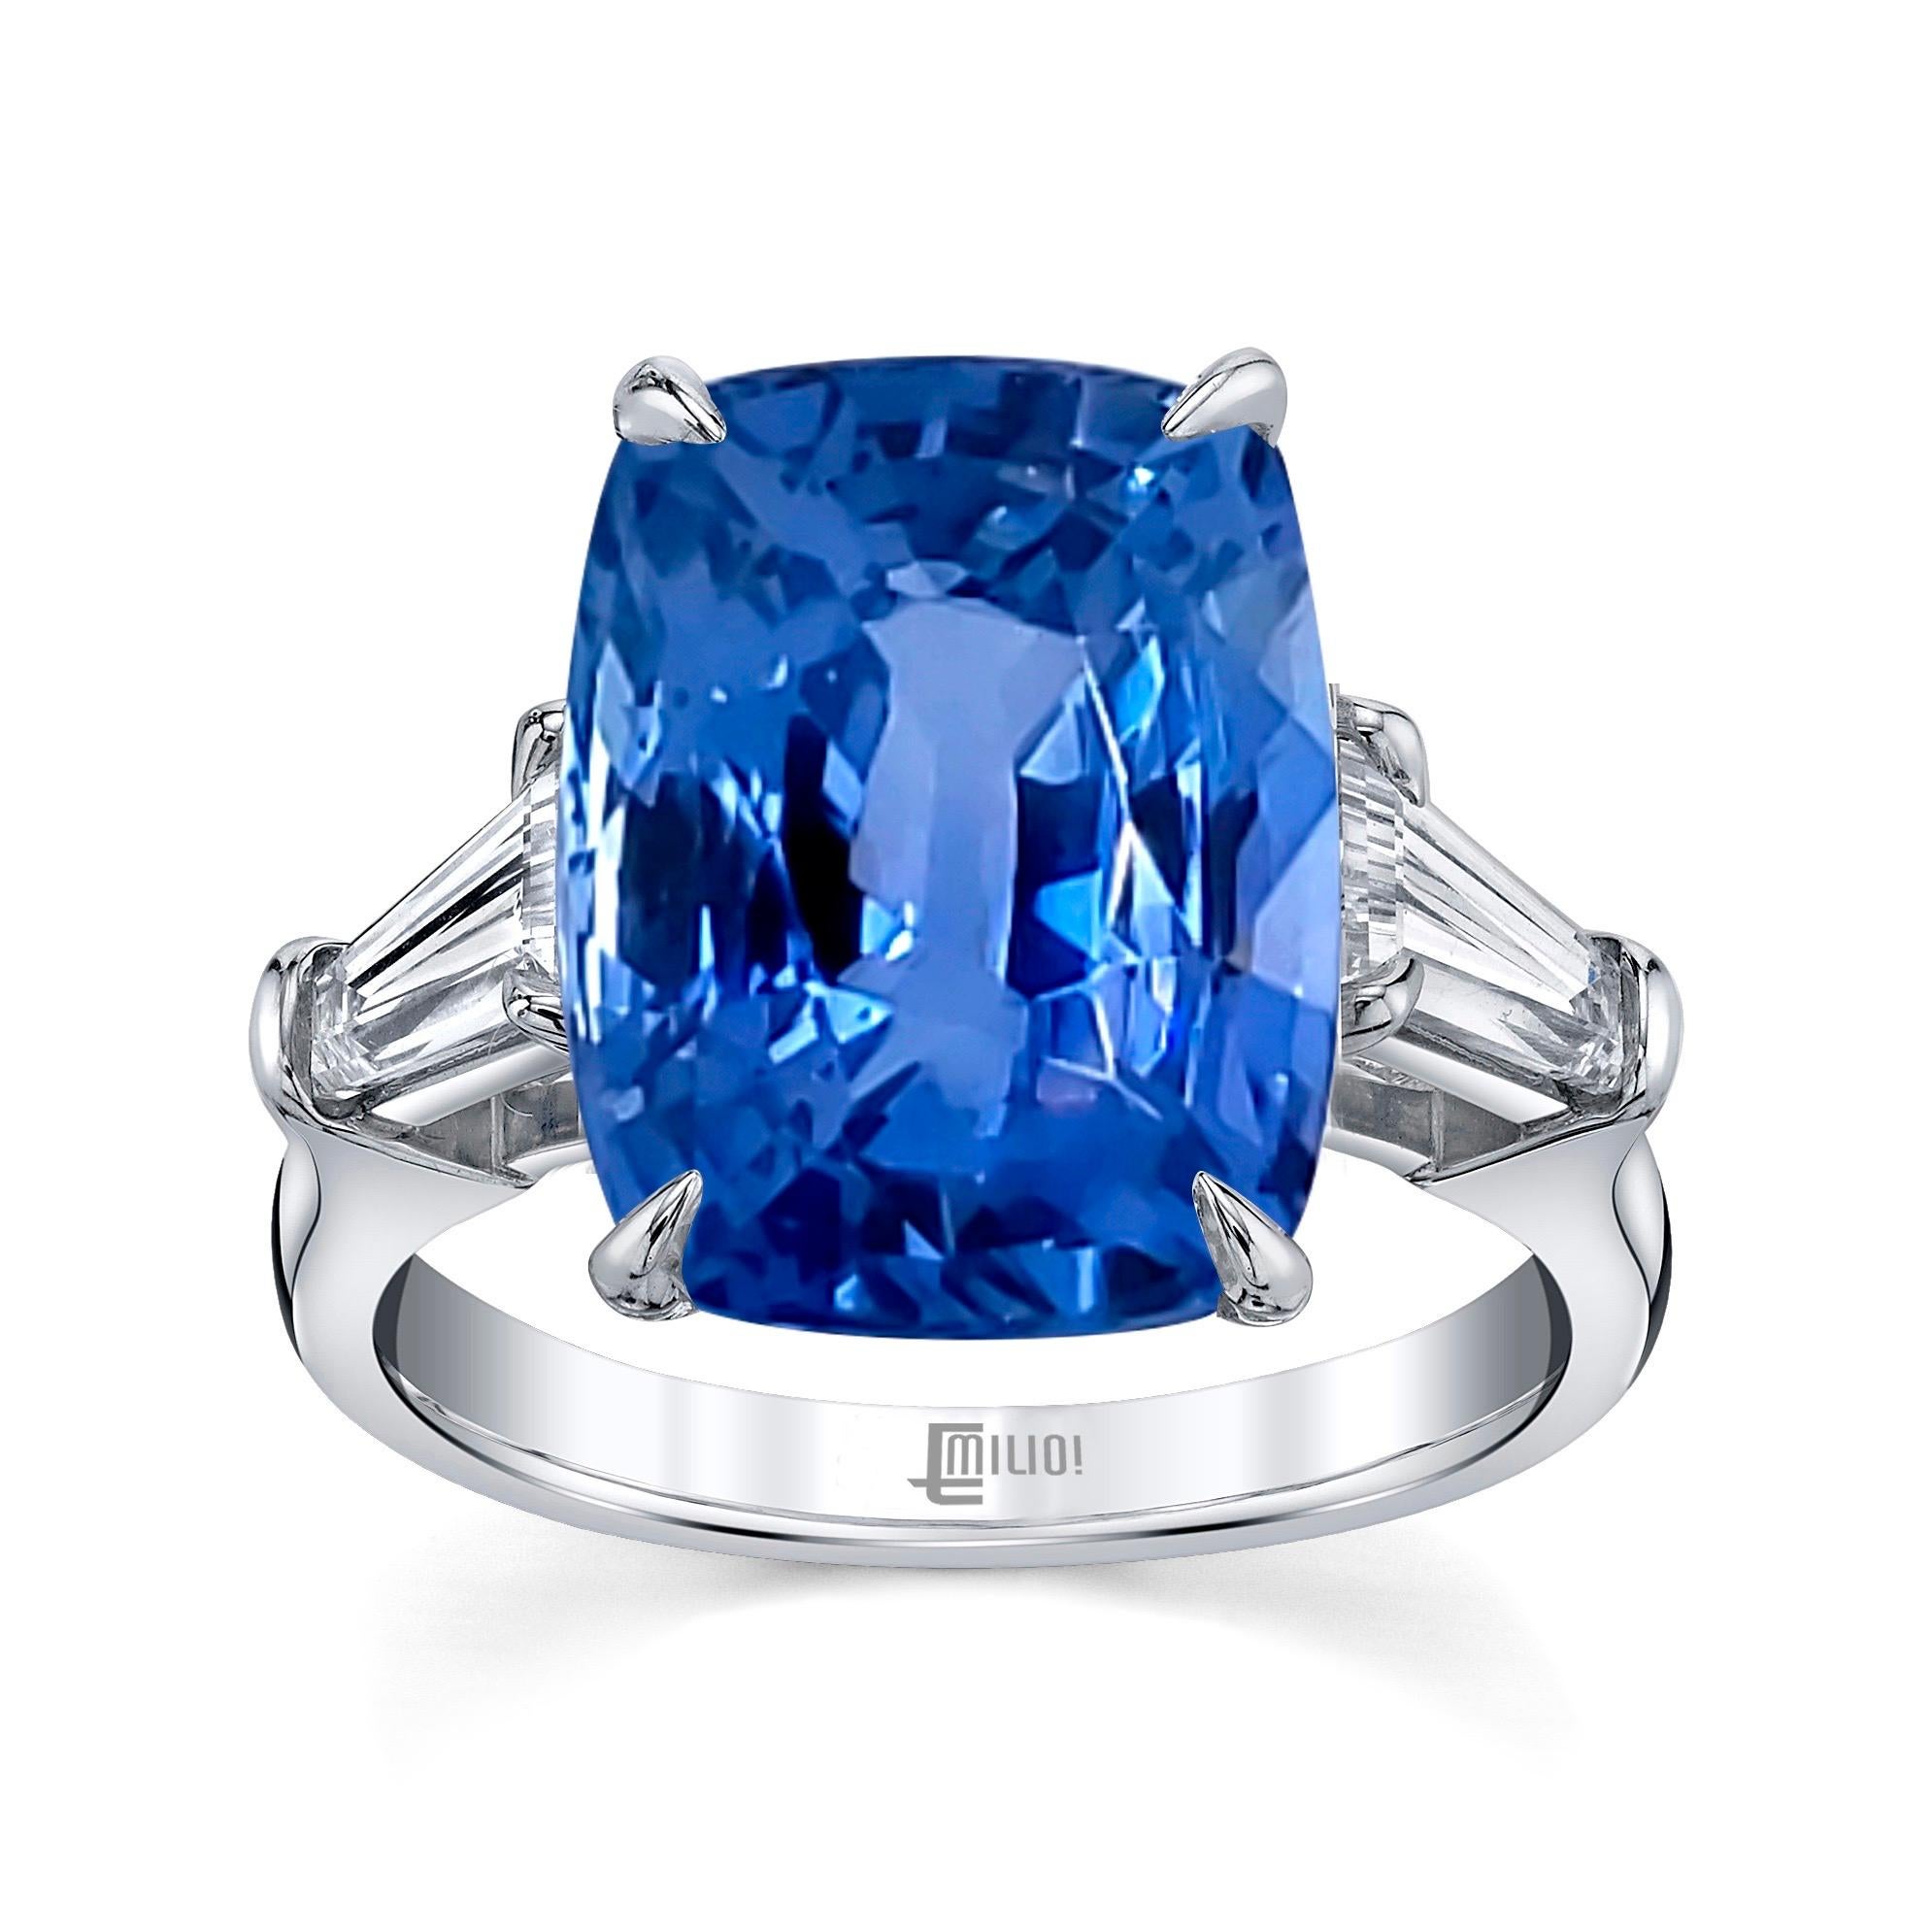 From The Vault At Emilio Jewelry New York,
Showcasing a gorgeous no heat elongated Sapphire of exceptional quality, and perfect cornflower blue color. Please inquire for details. 